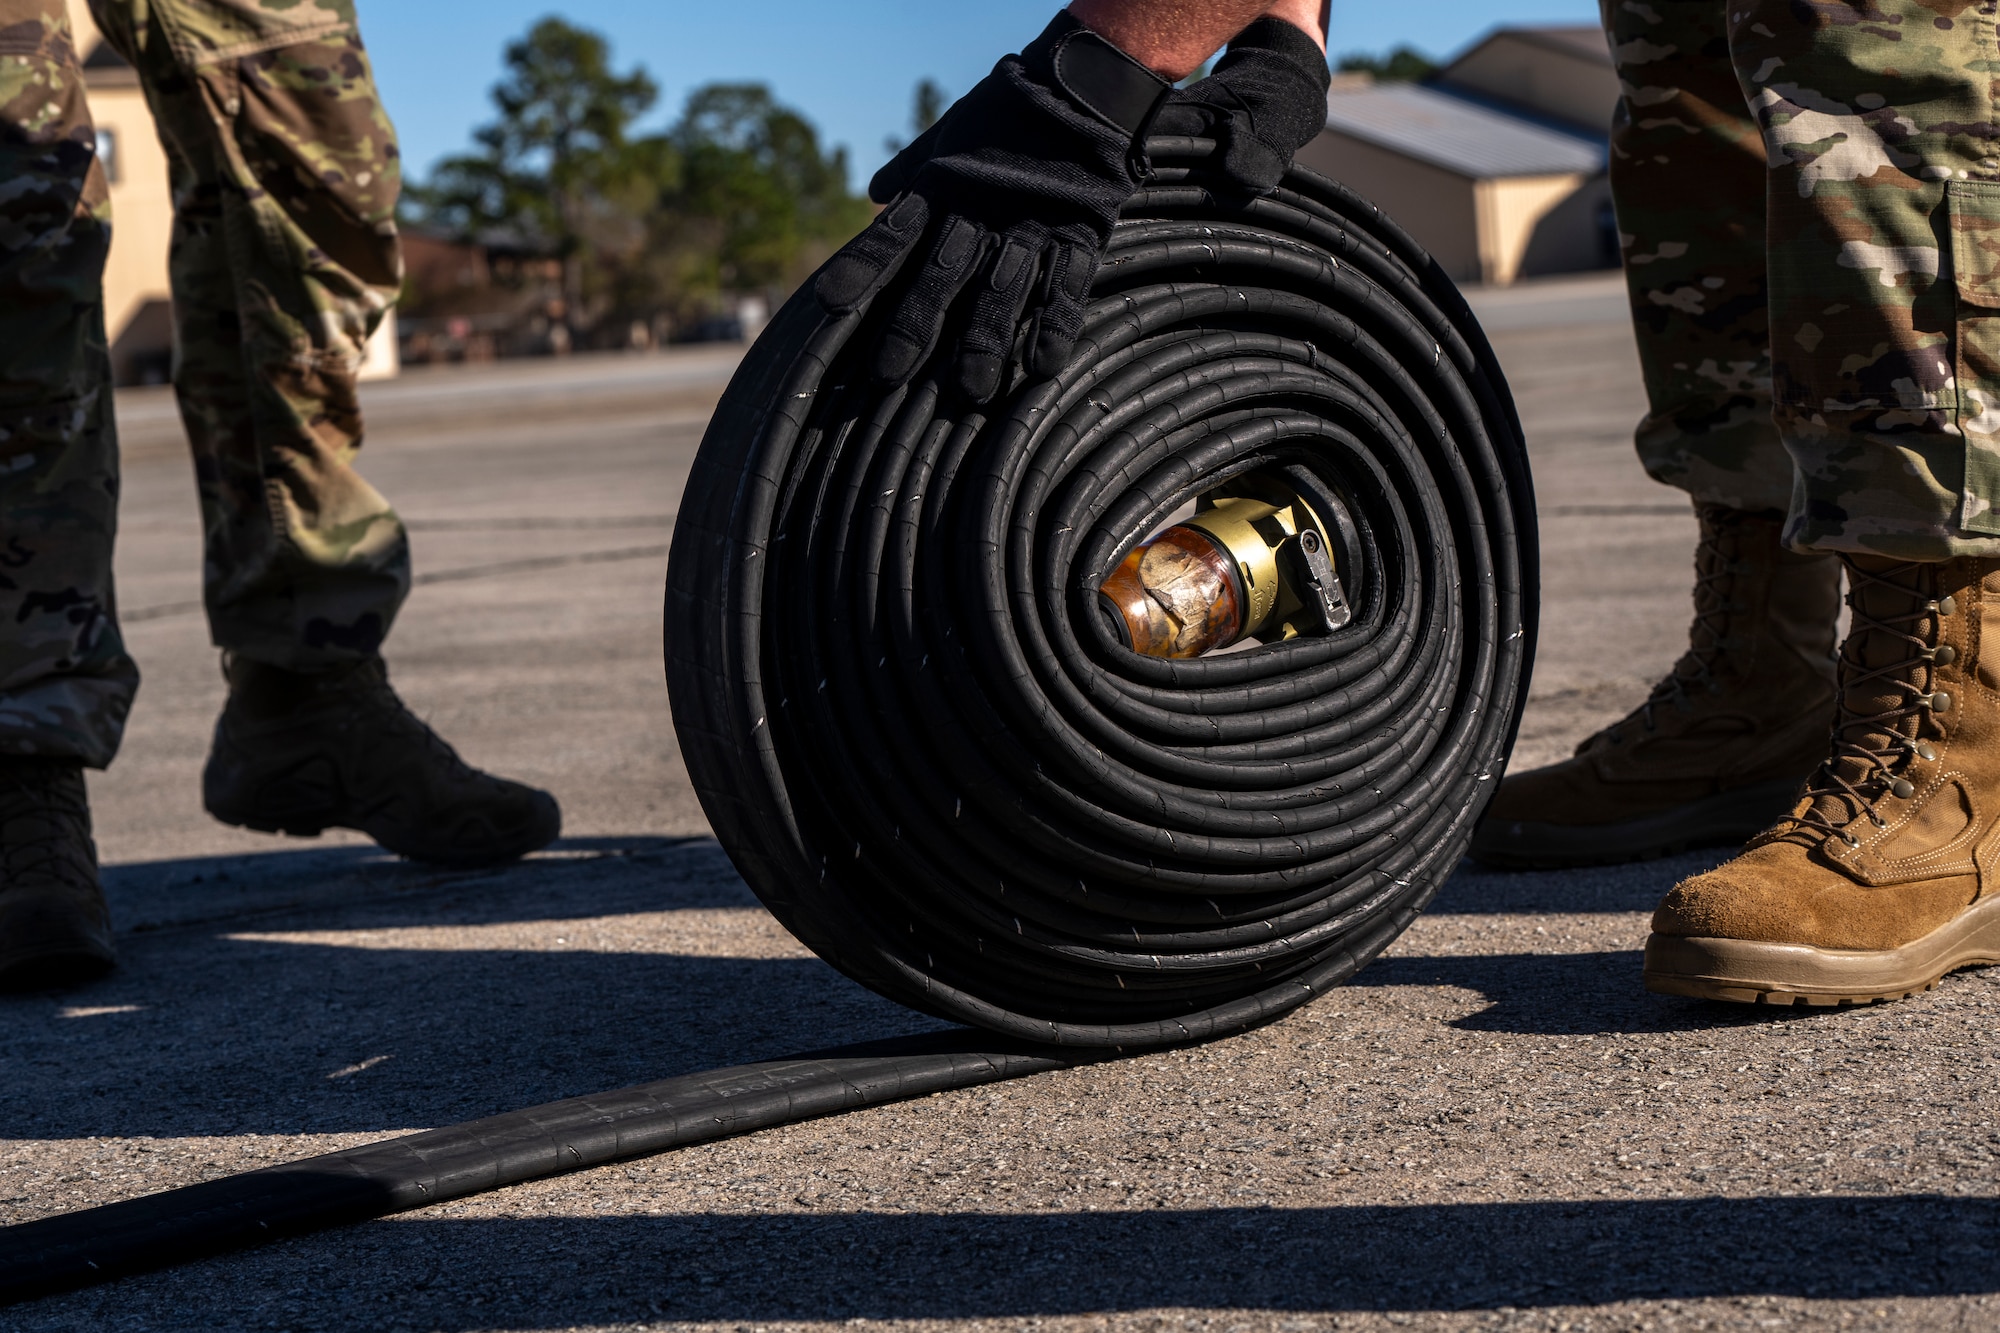 A U.S. Airman assigned to the 23rd Logistic Readiness Squadron rolls a hose